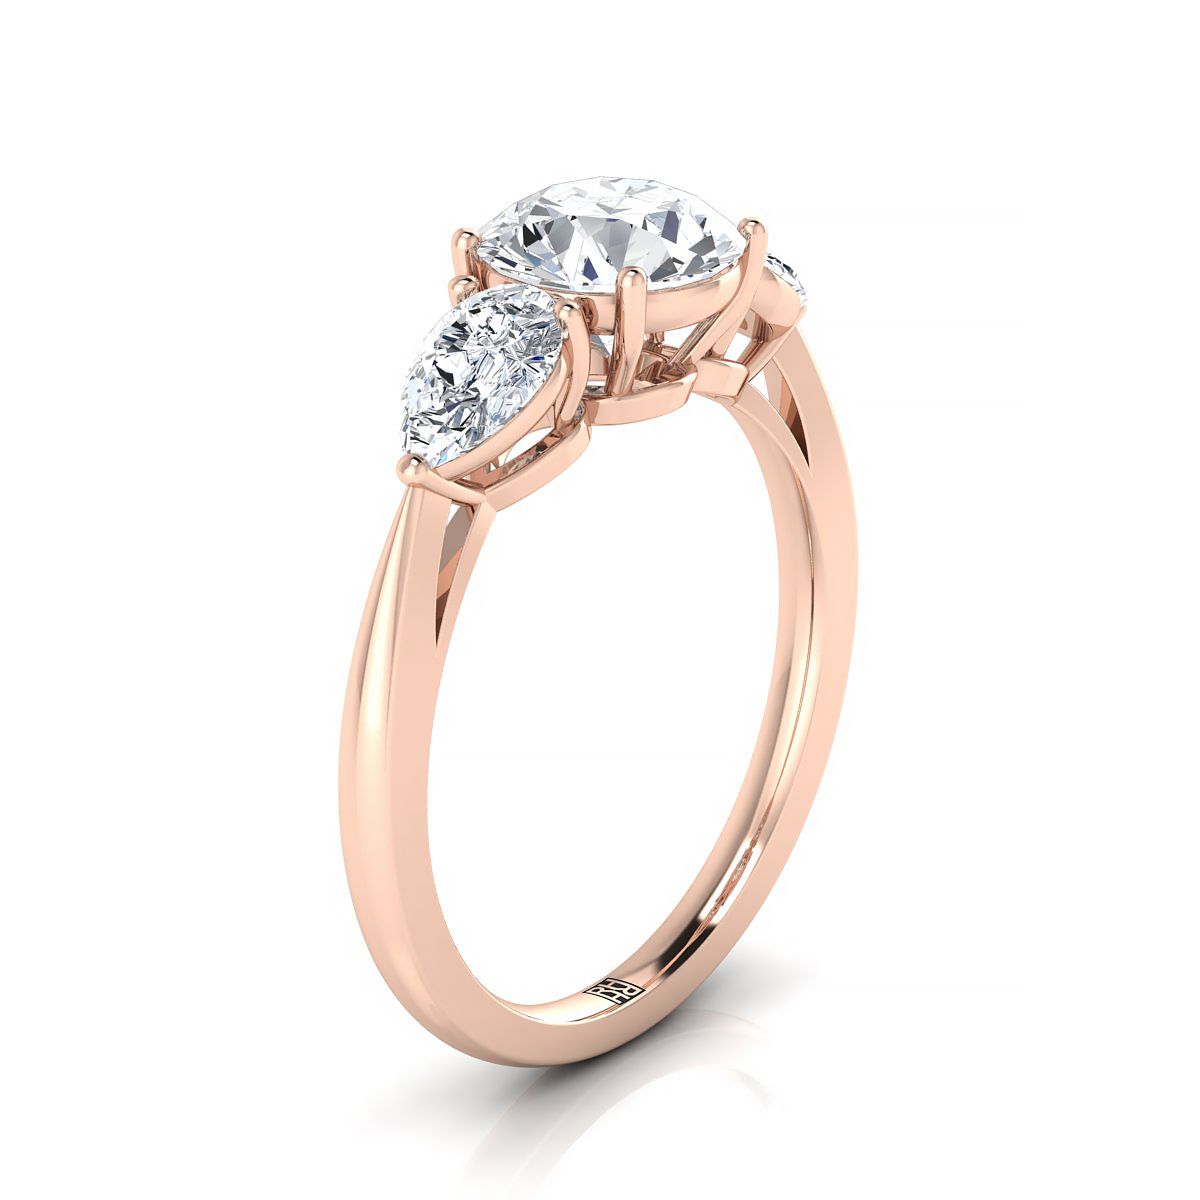 14K Rose Gold Round Brilliant Morganite Perfectly Matched Pear Shaped Three Diamond Engagement Ring -7/8ctw